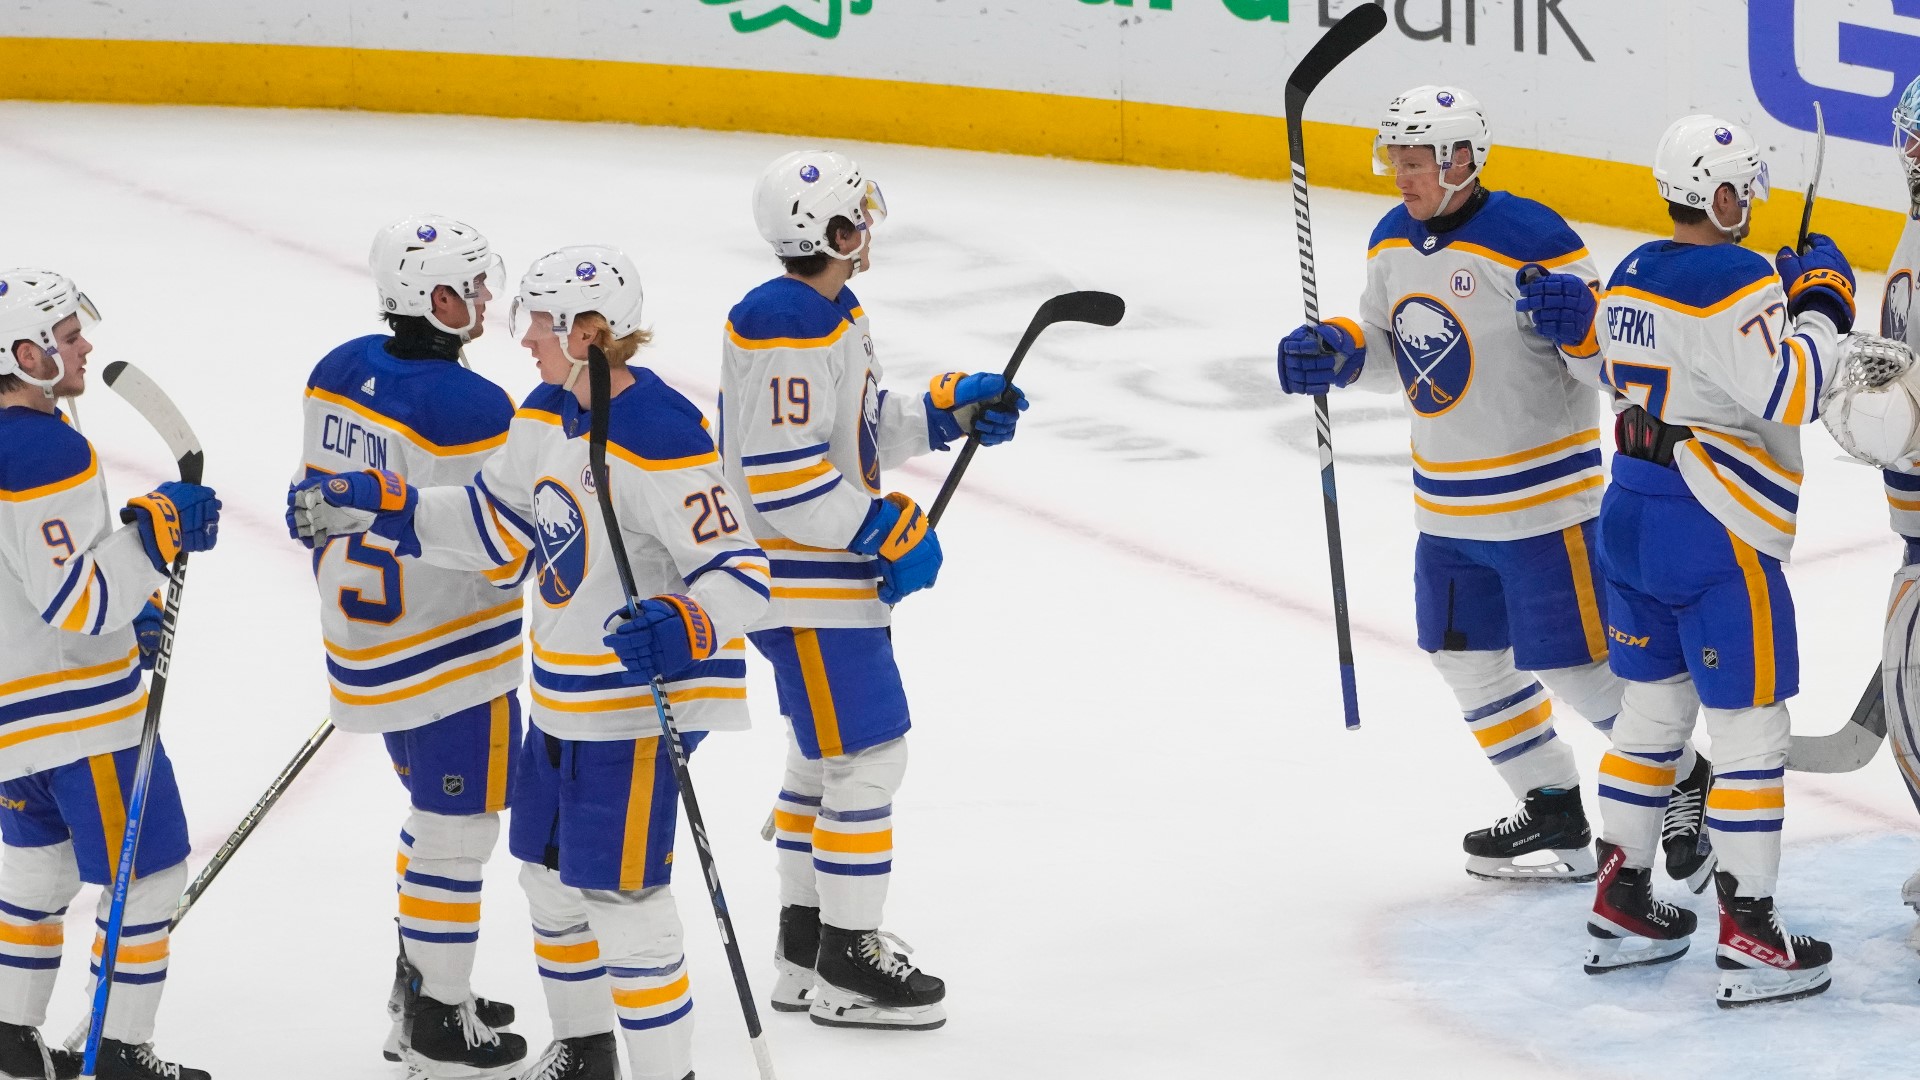 WGRZ's Sabres/NHL Insider Paul Hamilton discusses the Sabres recent level of play and where this team stands in the Eastern Conference wild card race.